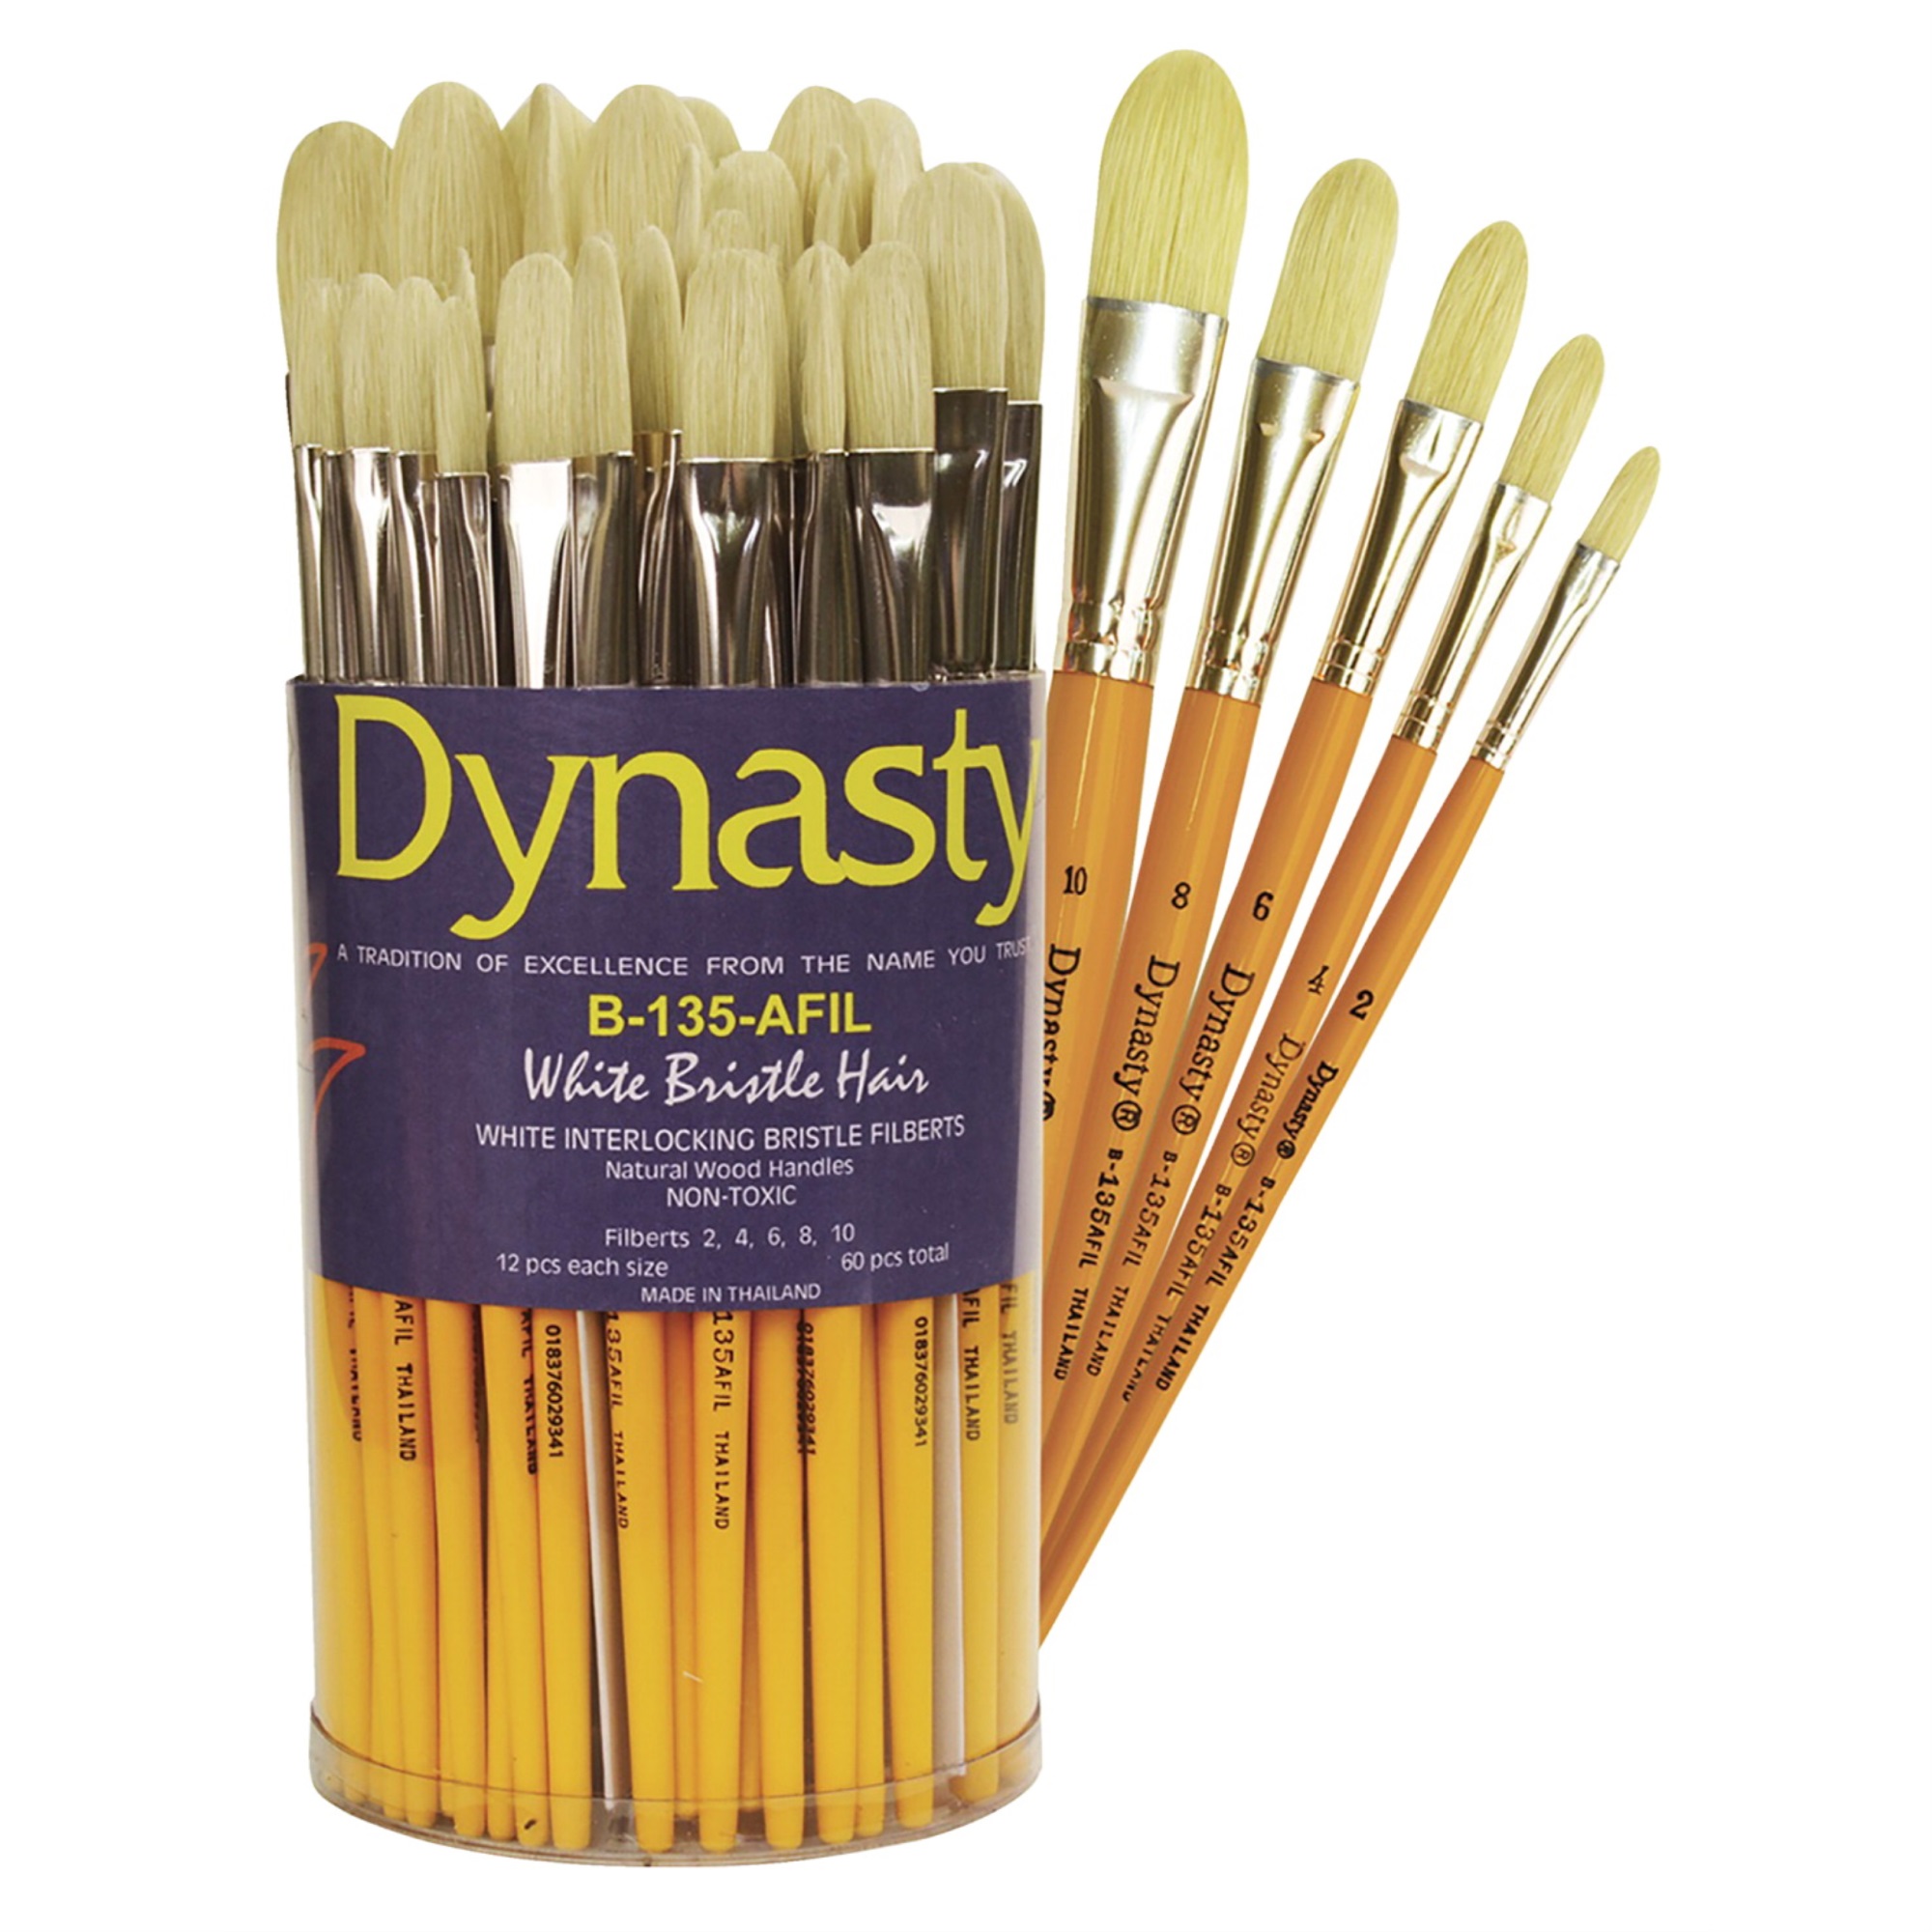 Dynasty Brush Dynasty Canister B-135-AFIL White Bristle Hair Canister, Assorted Sizes, Filberts, Set of 60